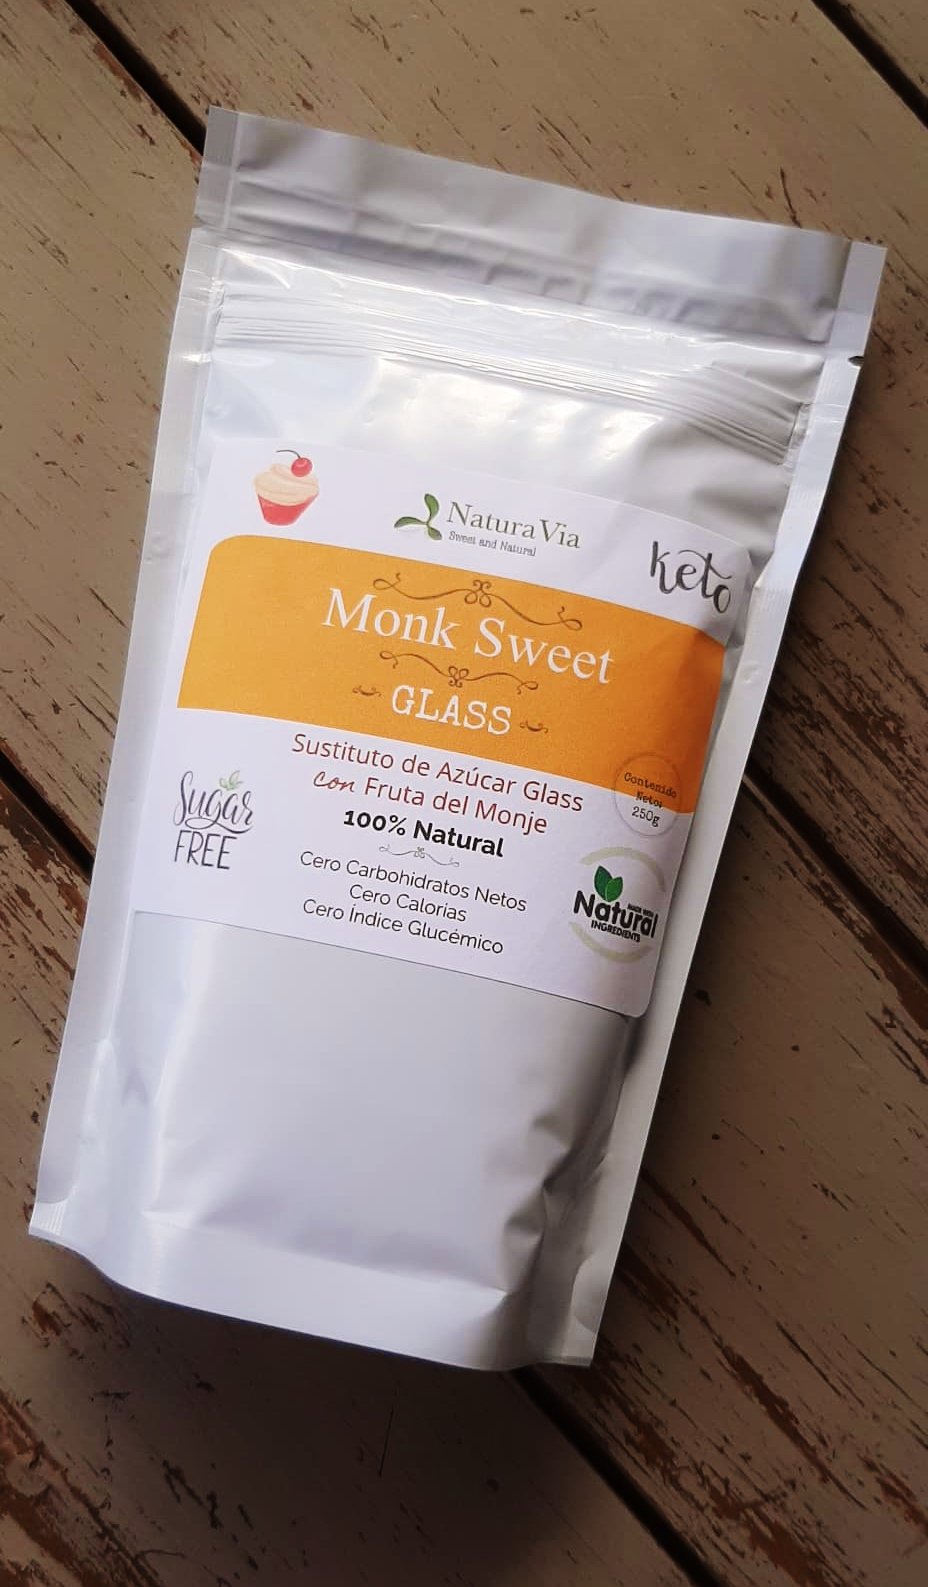 Monk Sweet GLASS - Calorie-free icing sugar substitute